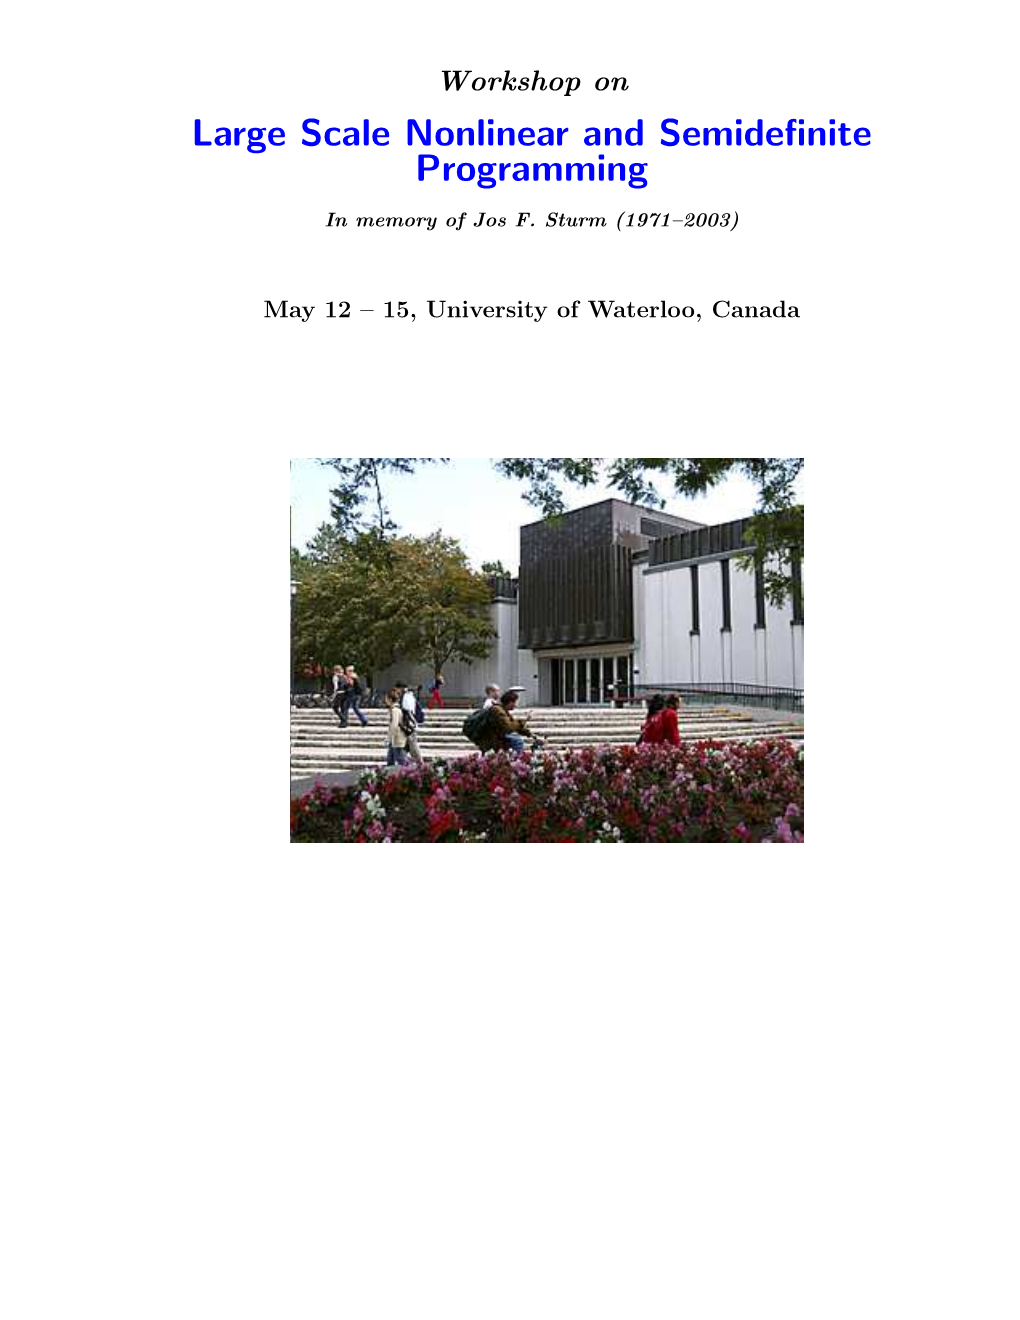 Large Scale Nonlinear and Semidefinite Programming